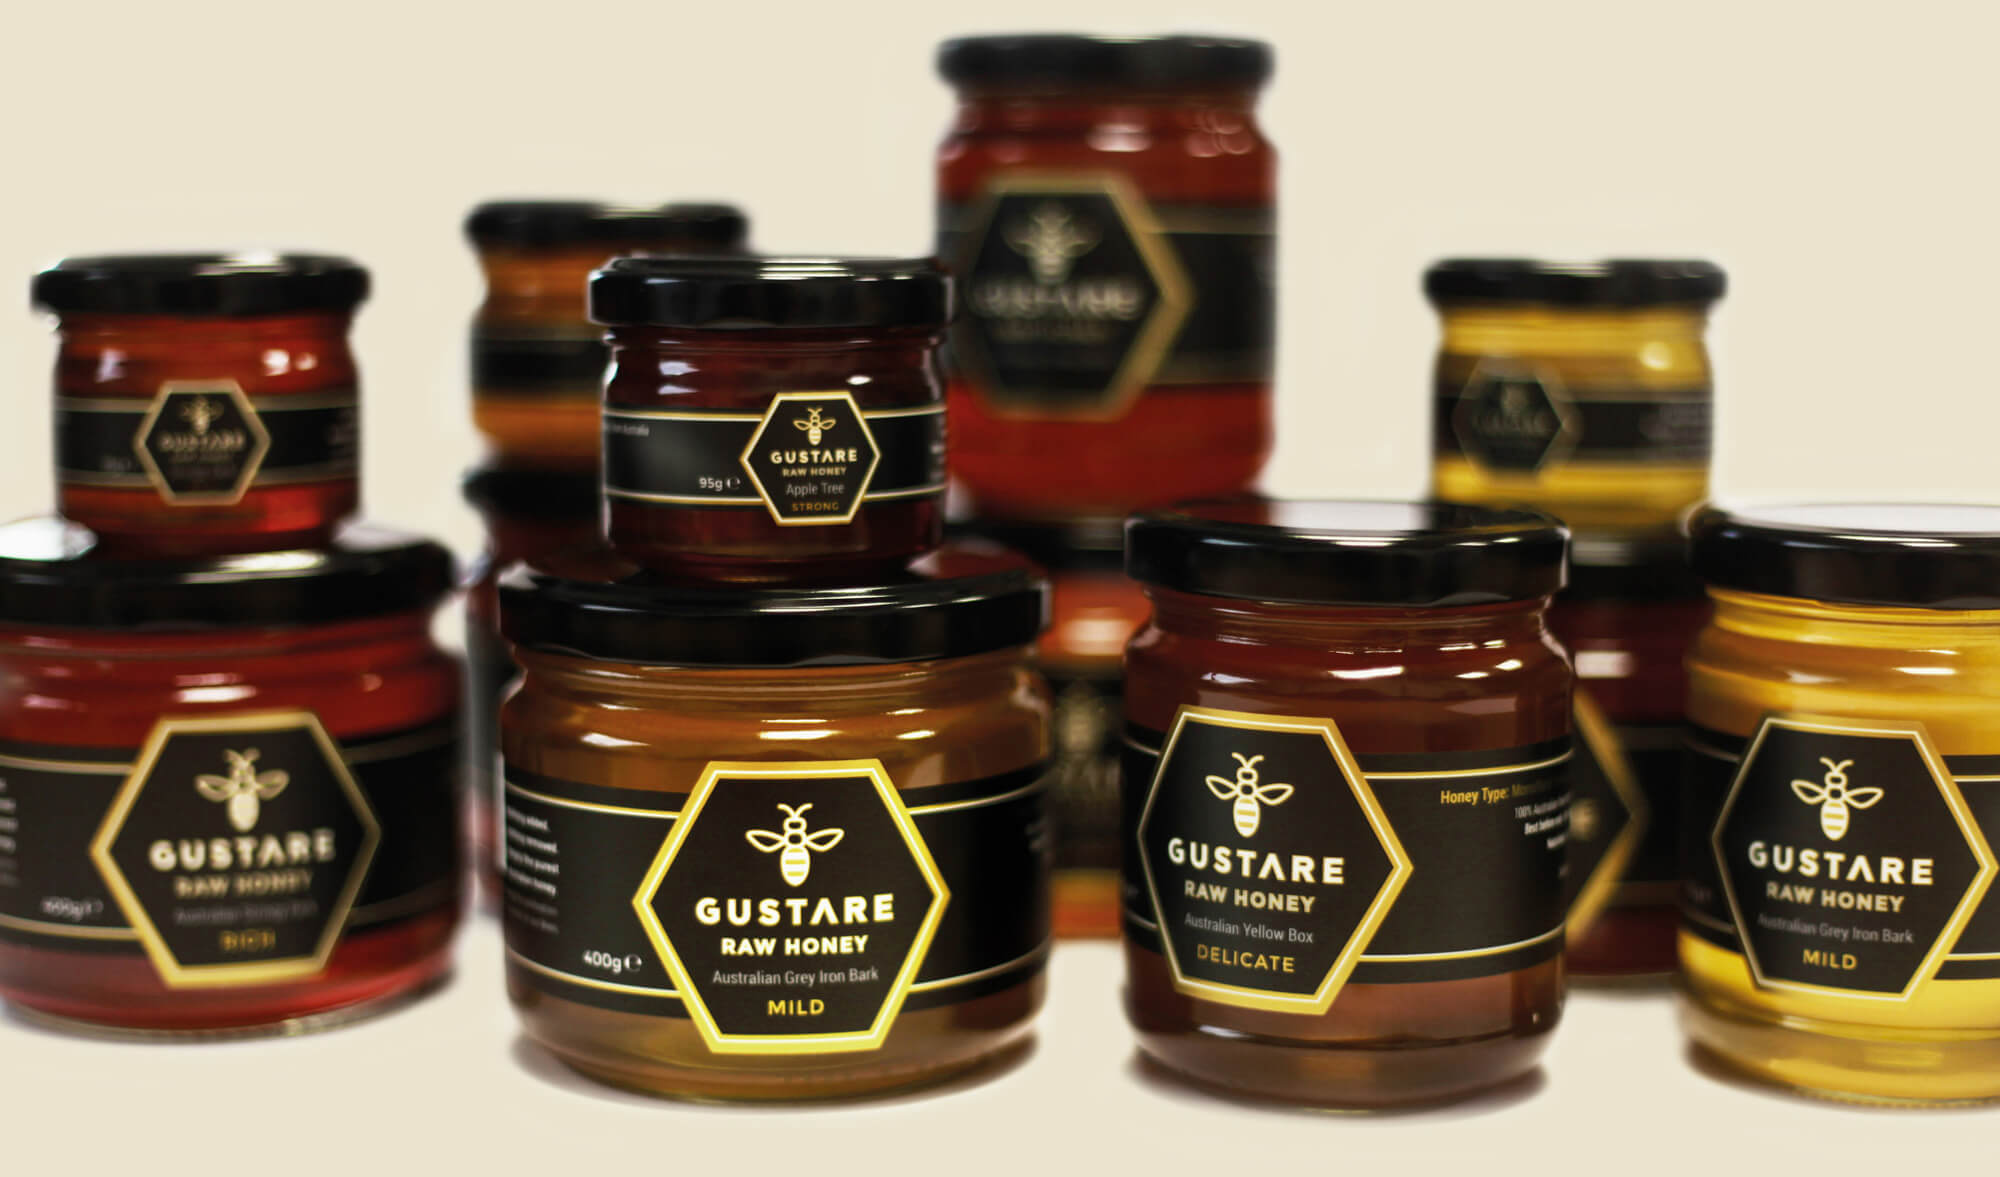 Gustare Honey products are now complete